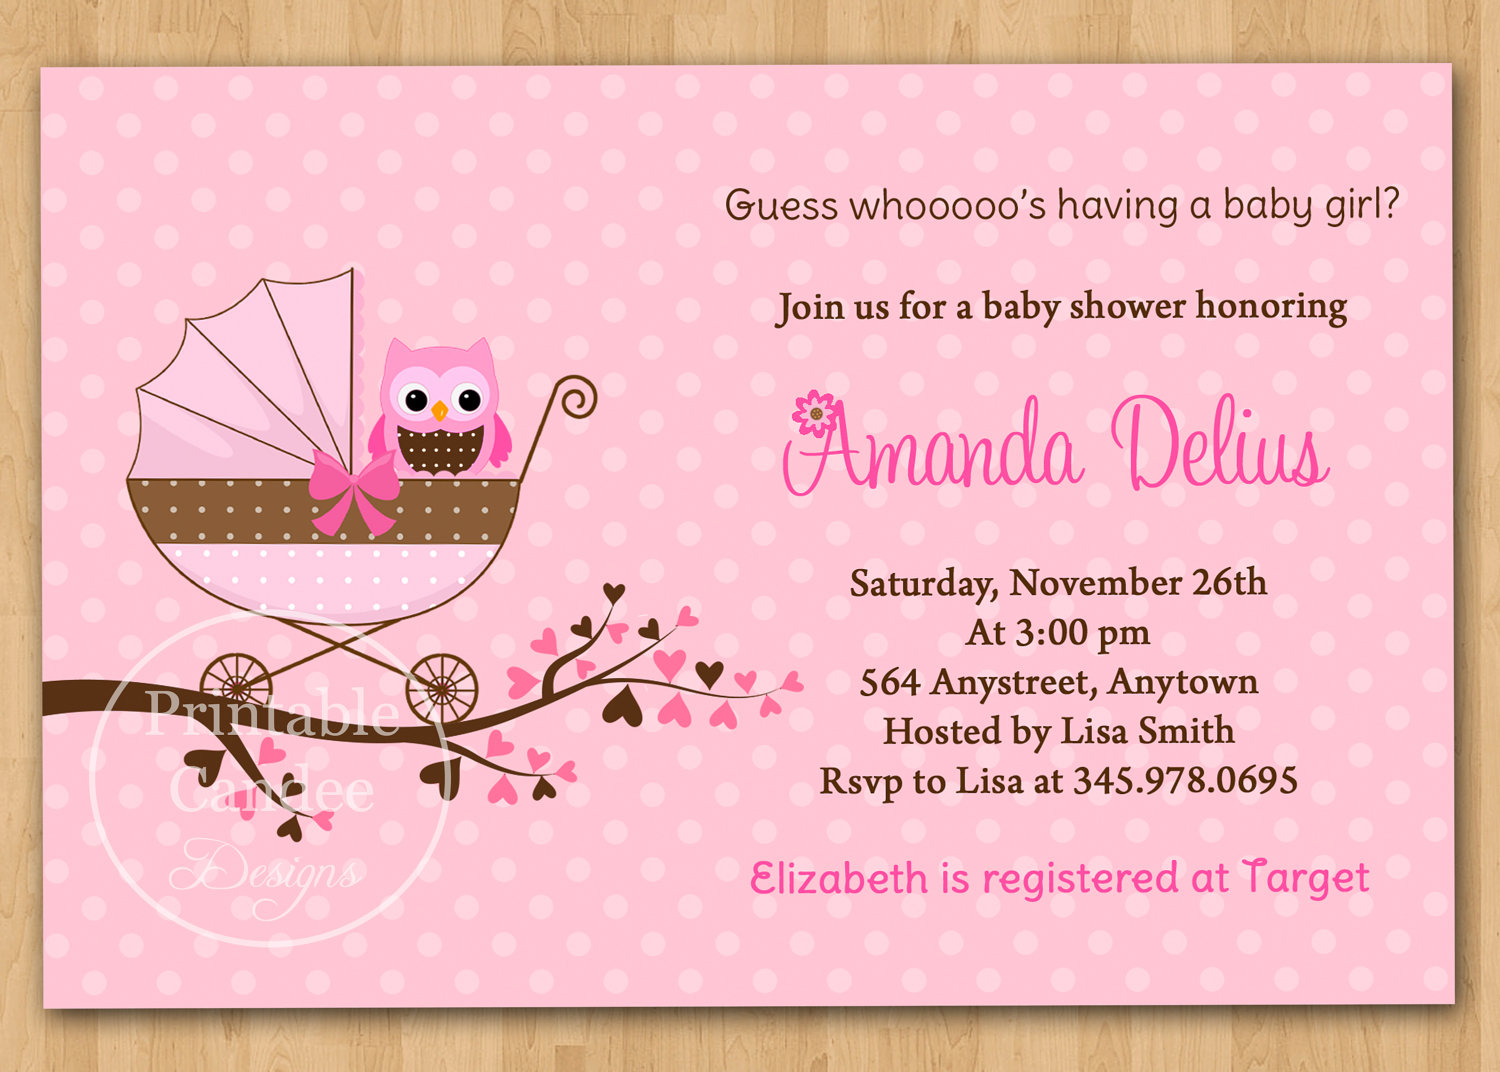 Full Size of Baby Shower:63+ Delightful Cheap Baby Shower Invitations Image Inspirations Cheap Baby Shower Invitations Baby Shower Centerpieces Princess Baby Shower Baby Shower Gifts For Girls Baby Shower Food Ideas Baby Shower Bingo